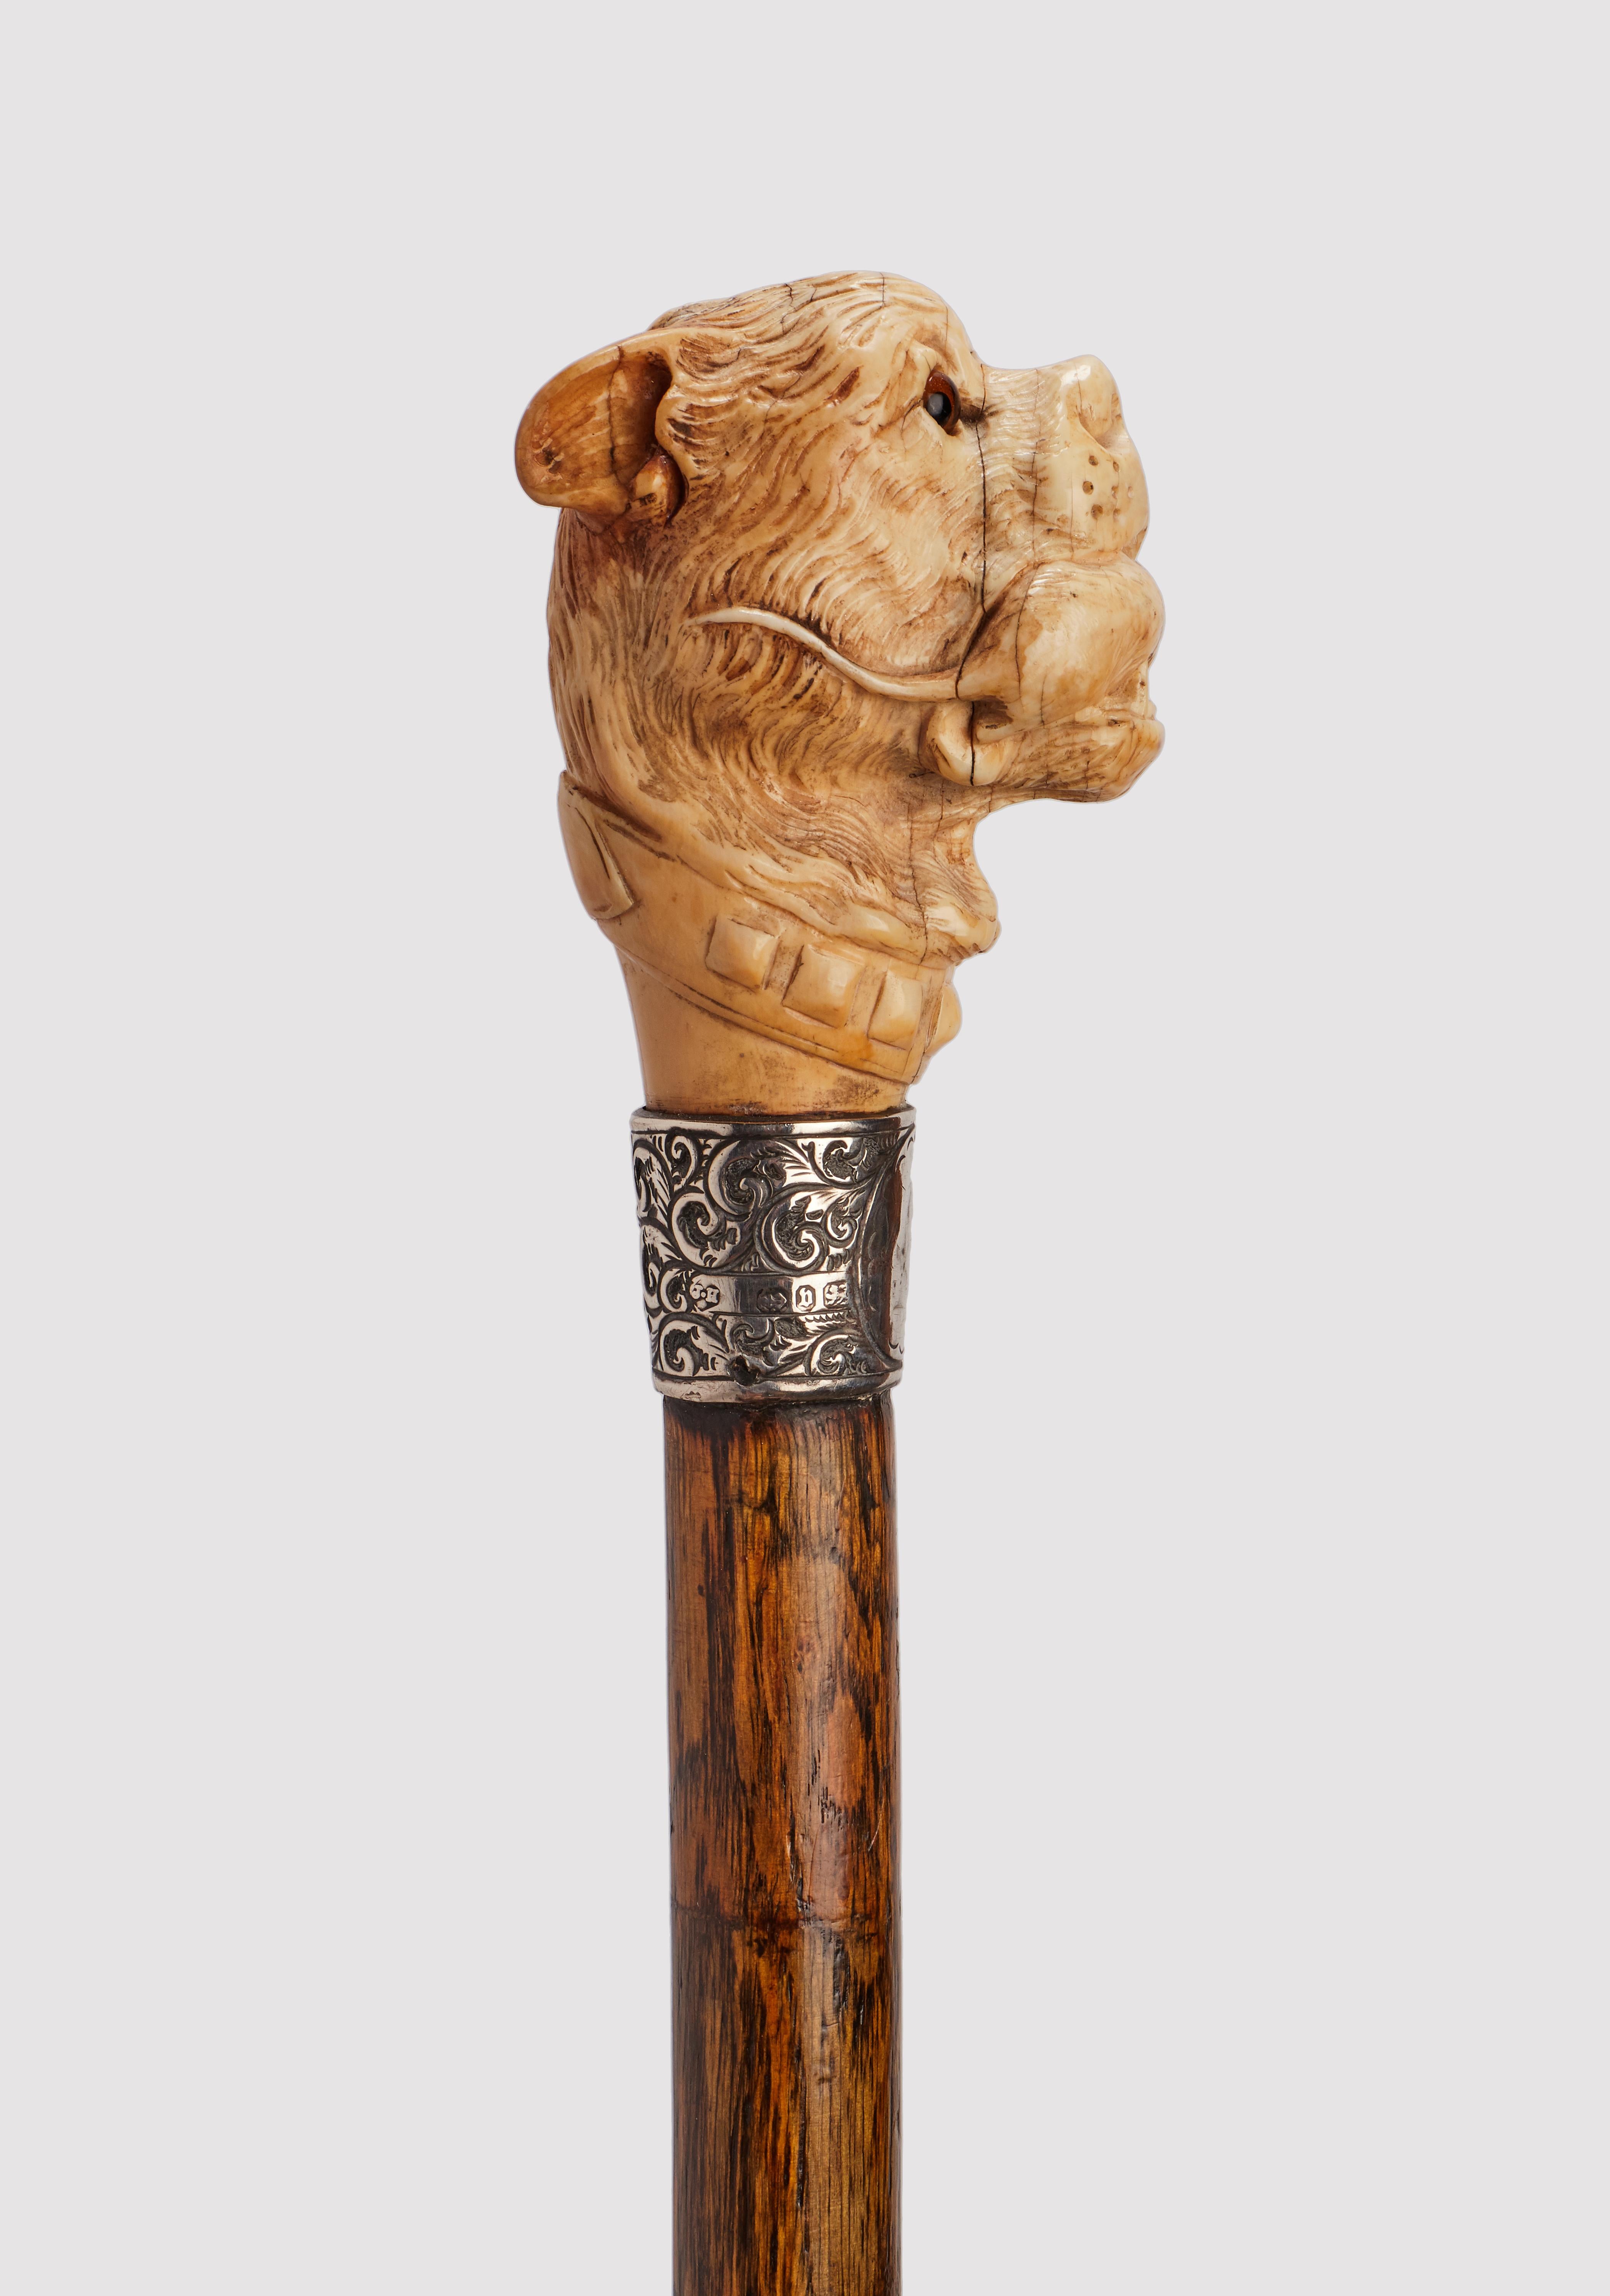 Walking stick: ivory carved handle, depicting a dog’s head holding a mouse in his mouth. Malacca wood shaft. Sulphur glass eyes. Brass ring. Metal ferrule. England circa 1890.                                                                          